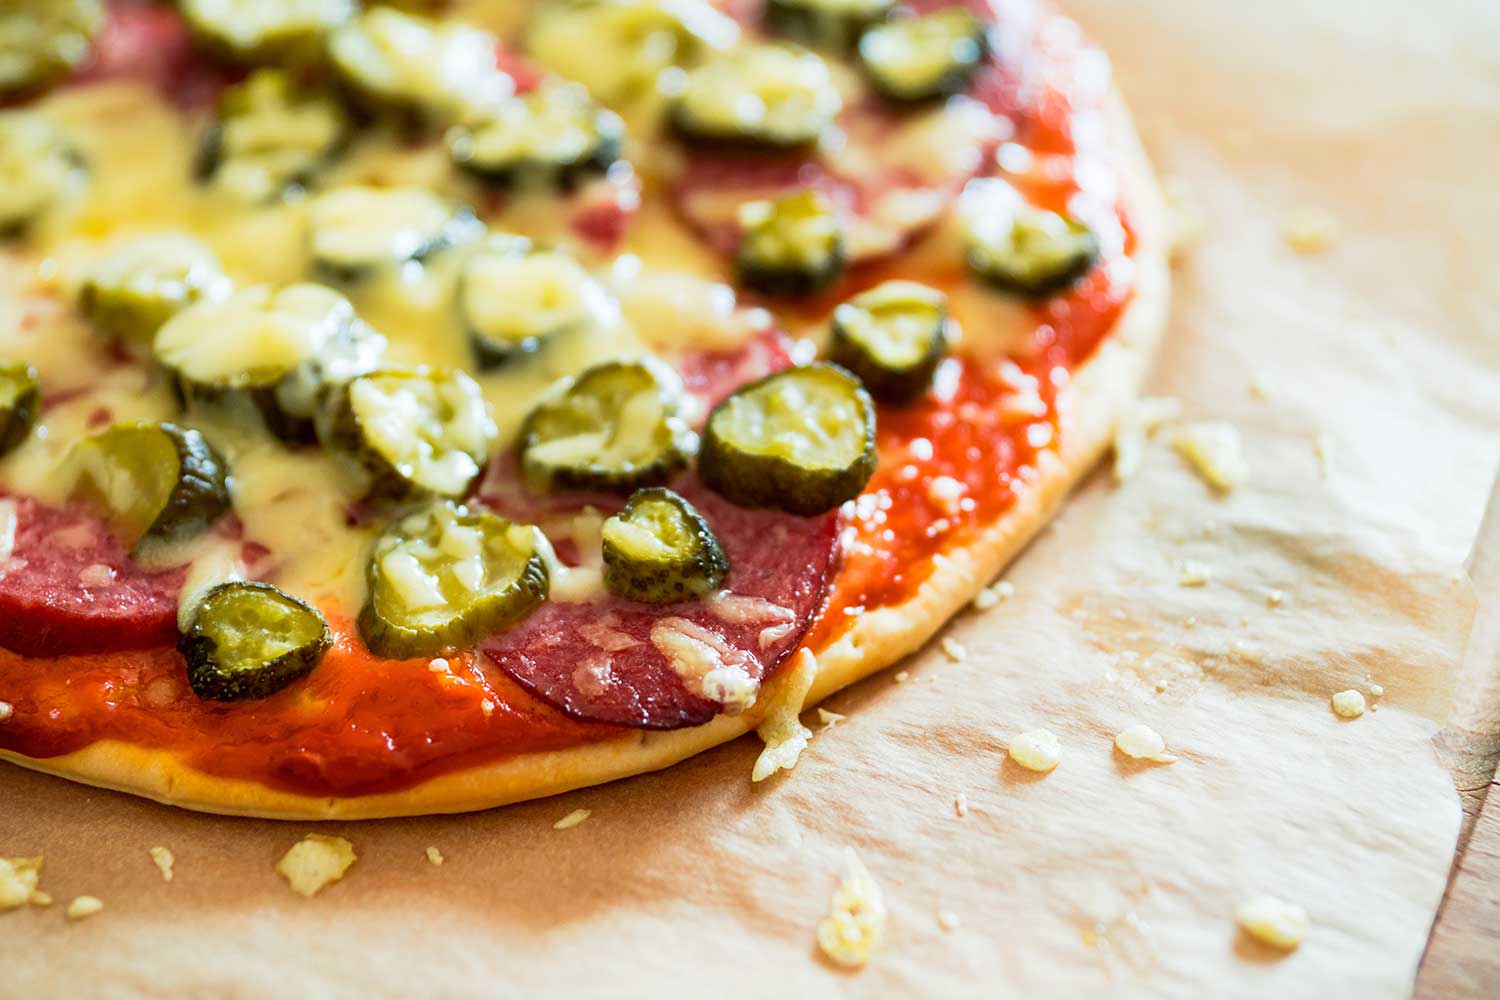 A savory looking thin crust pizza topped with cheese, pepperoni and slices of dill pickles.